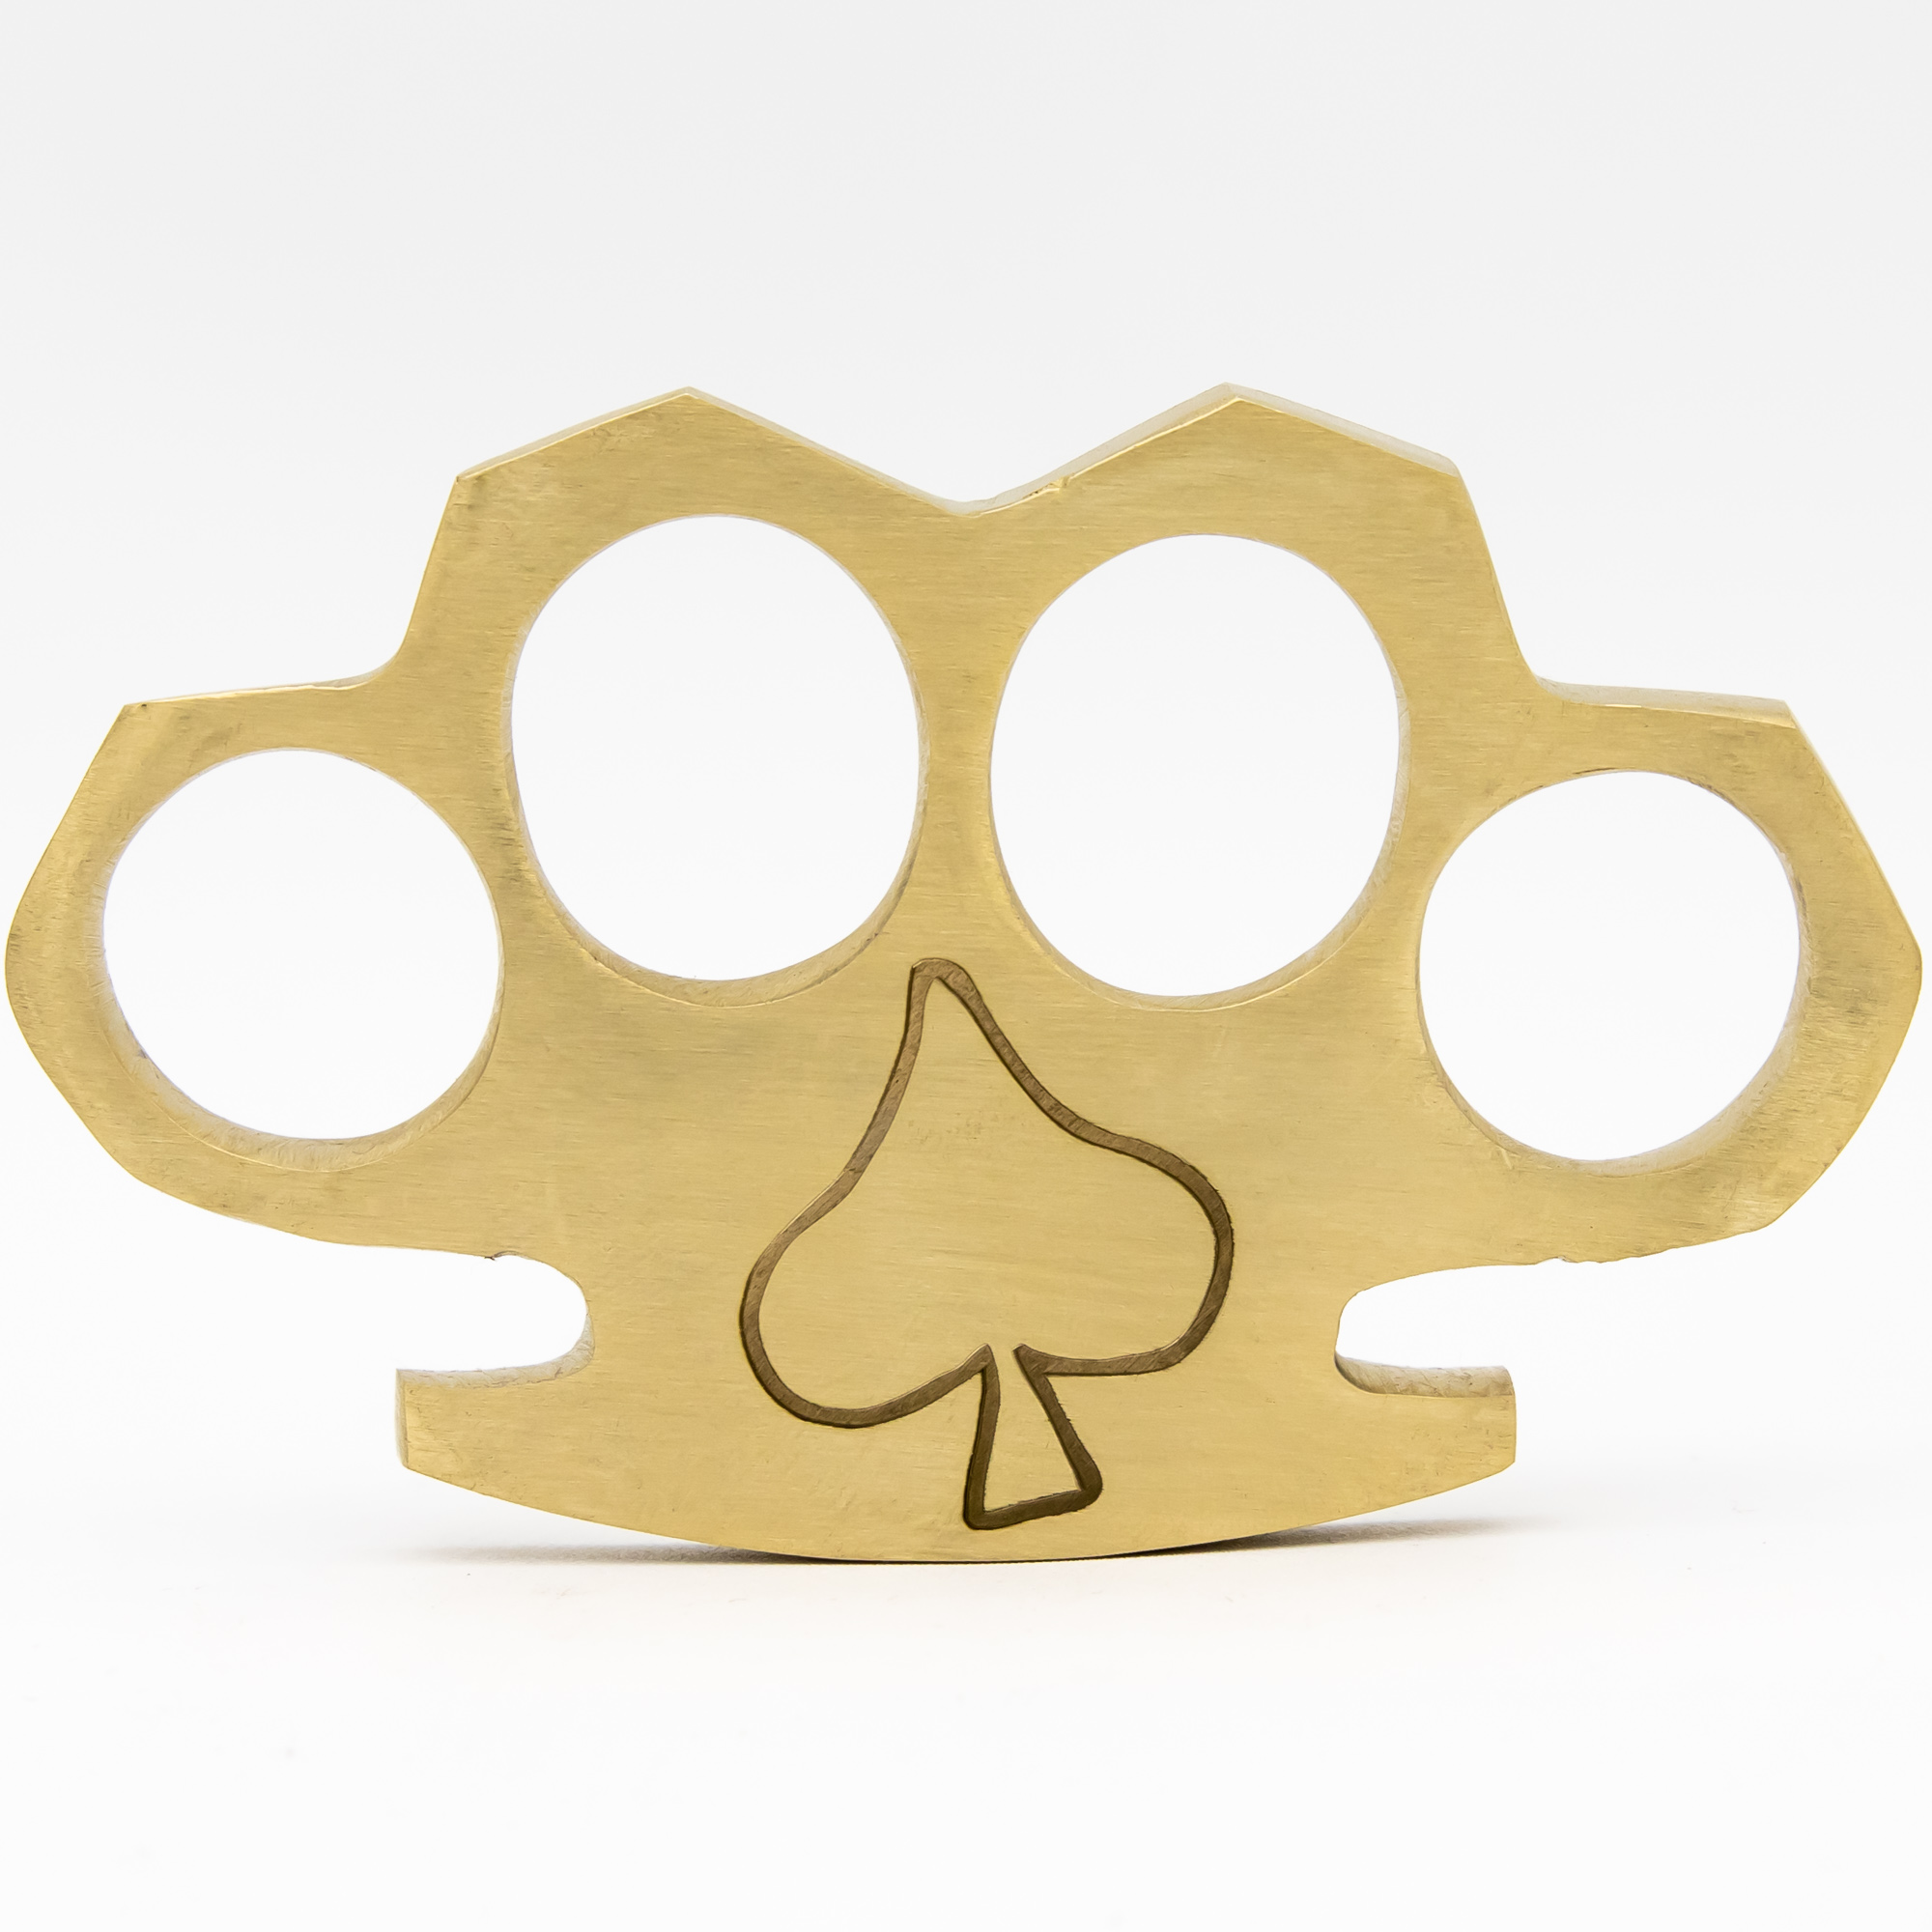 Full House 100% Pure Brass Knuckle Paper Weight Accessory